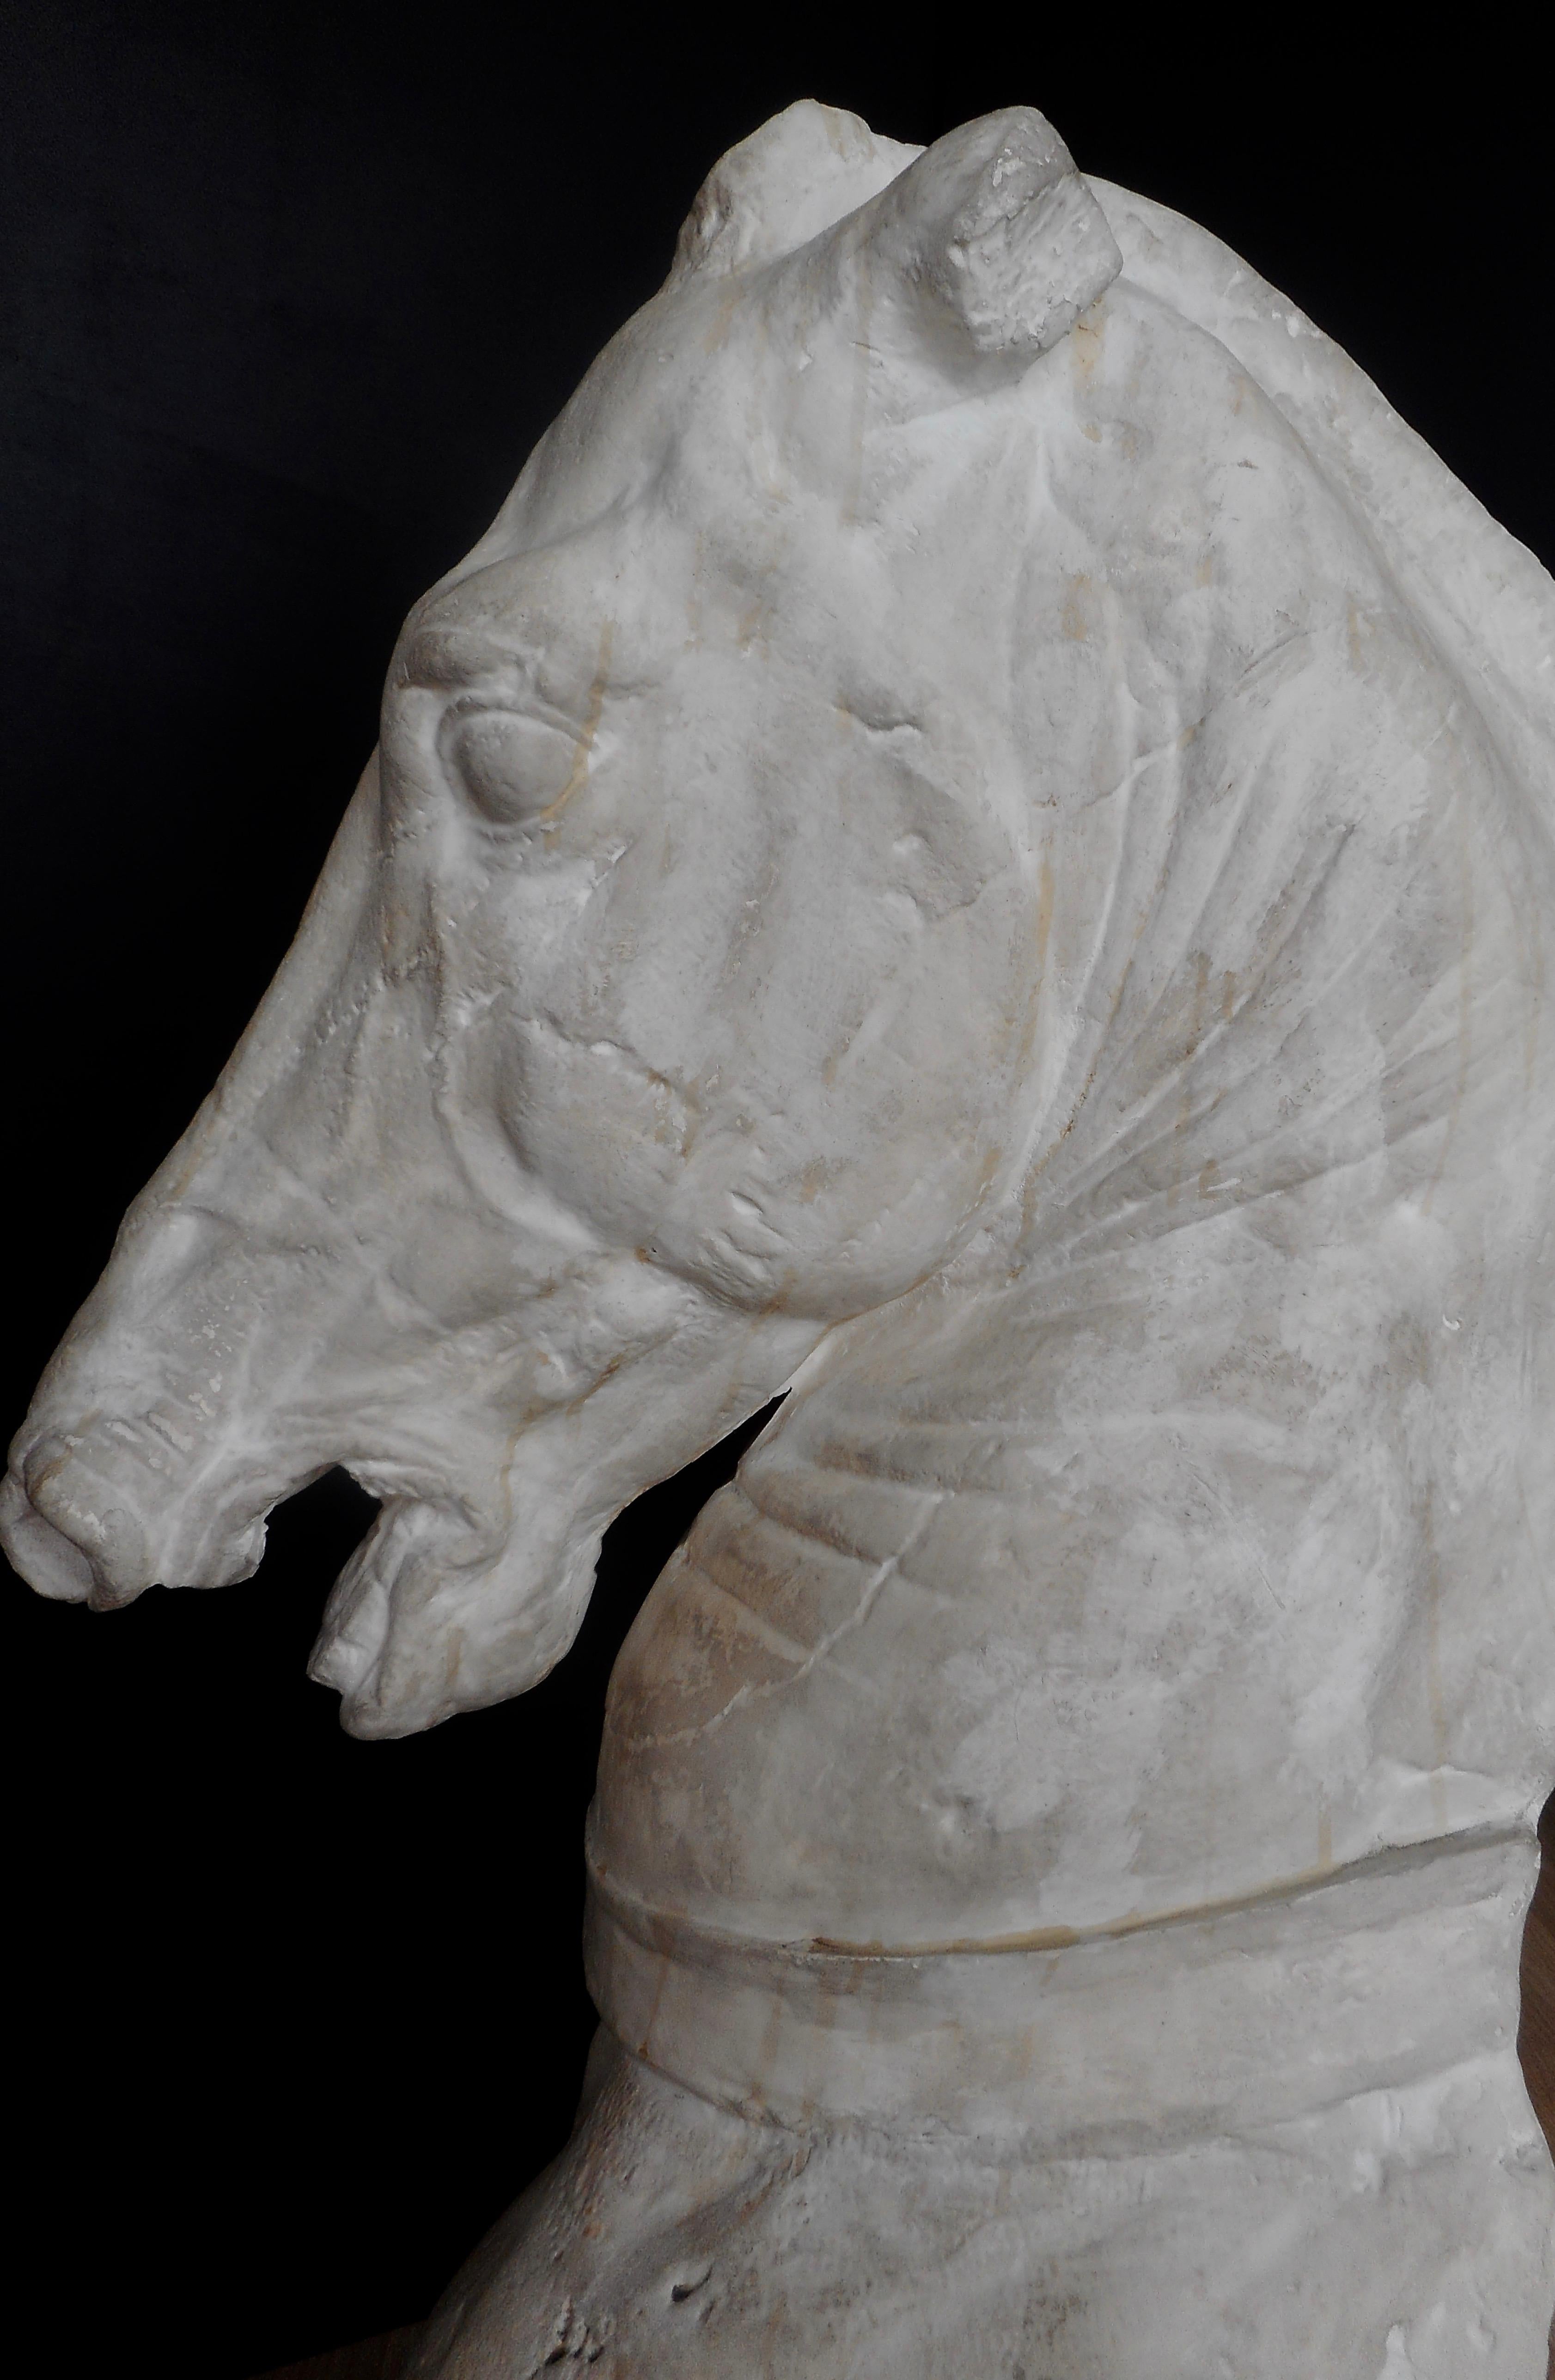 Plaster sculpture of Phidias horse (British Museum).
From a former sculptor workshop,
circa 1930.